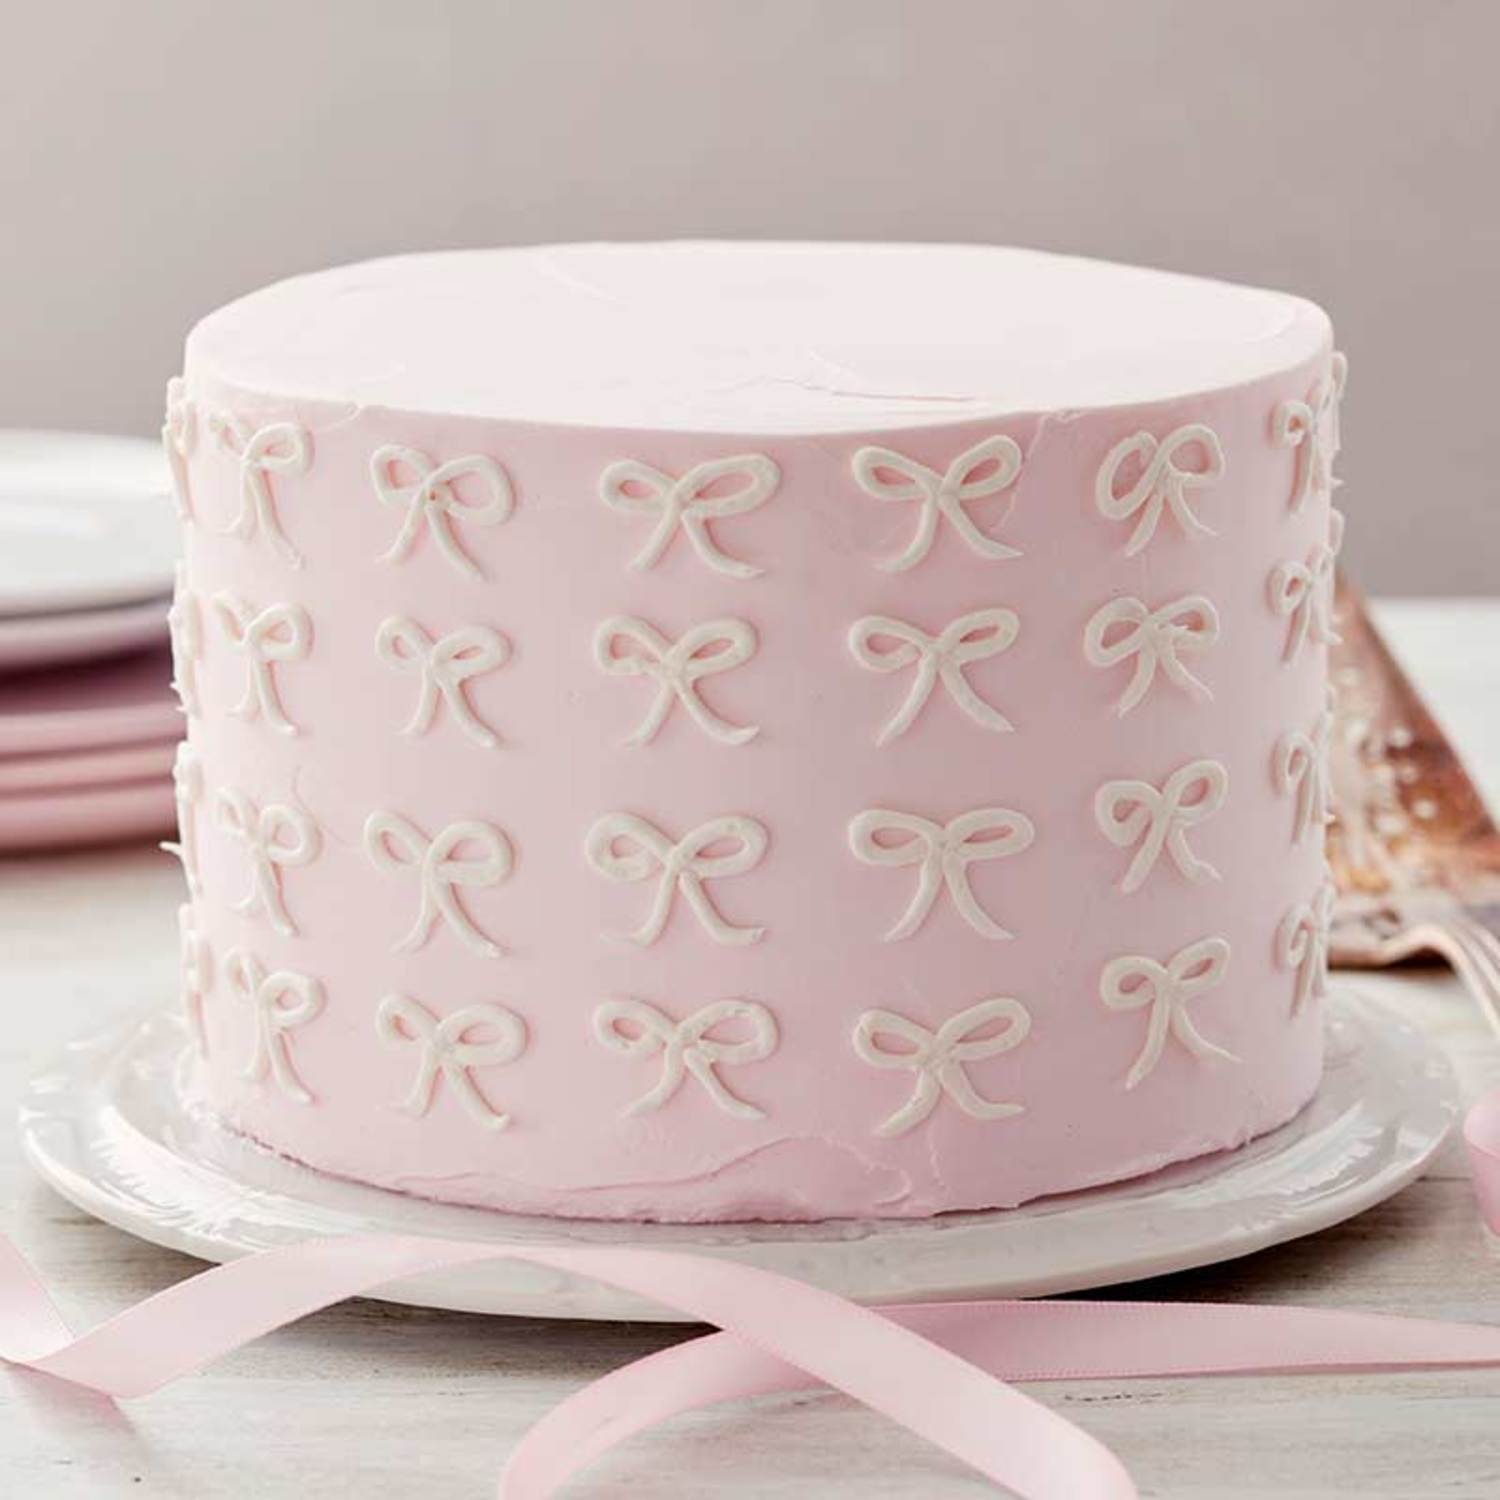 Present Bow Cake - My Cakes and Cakes